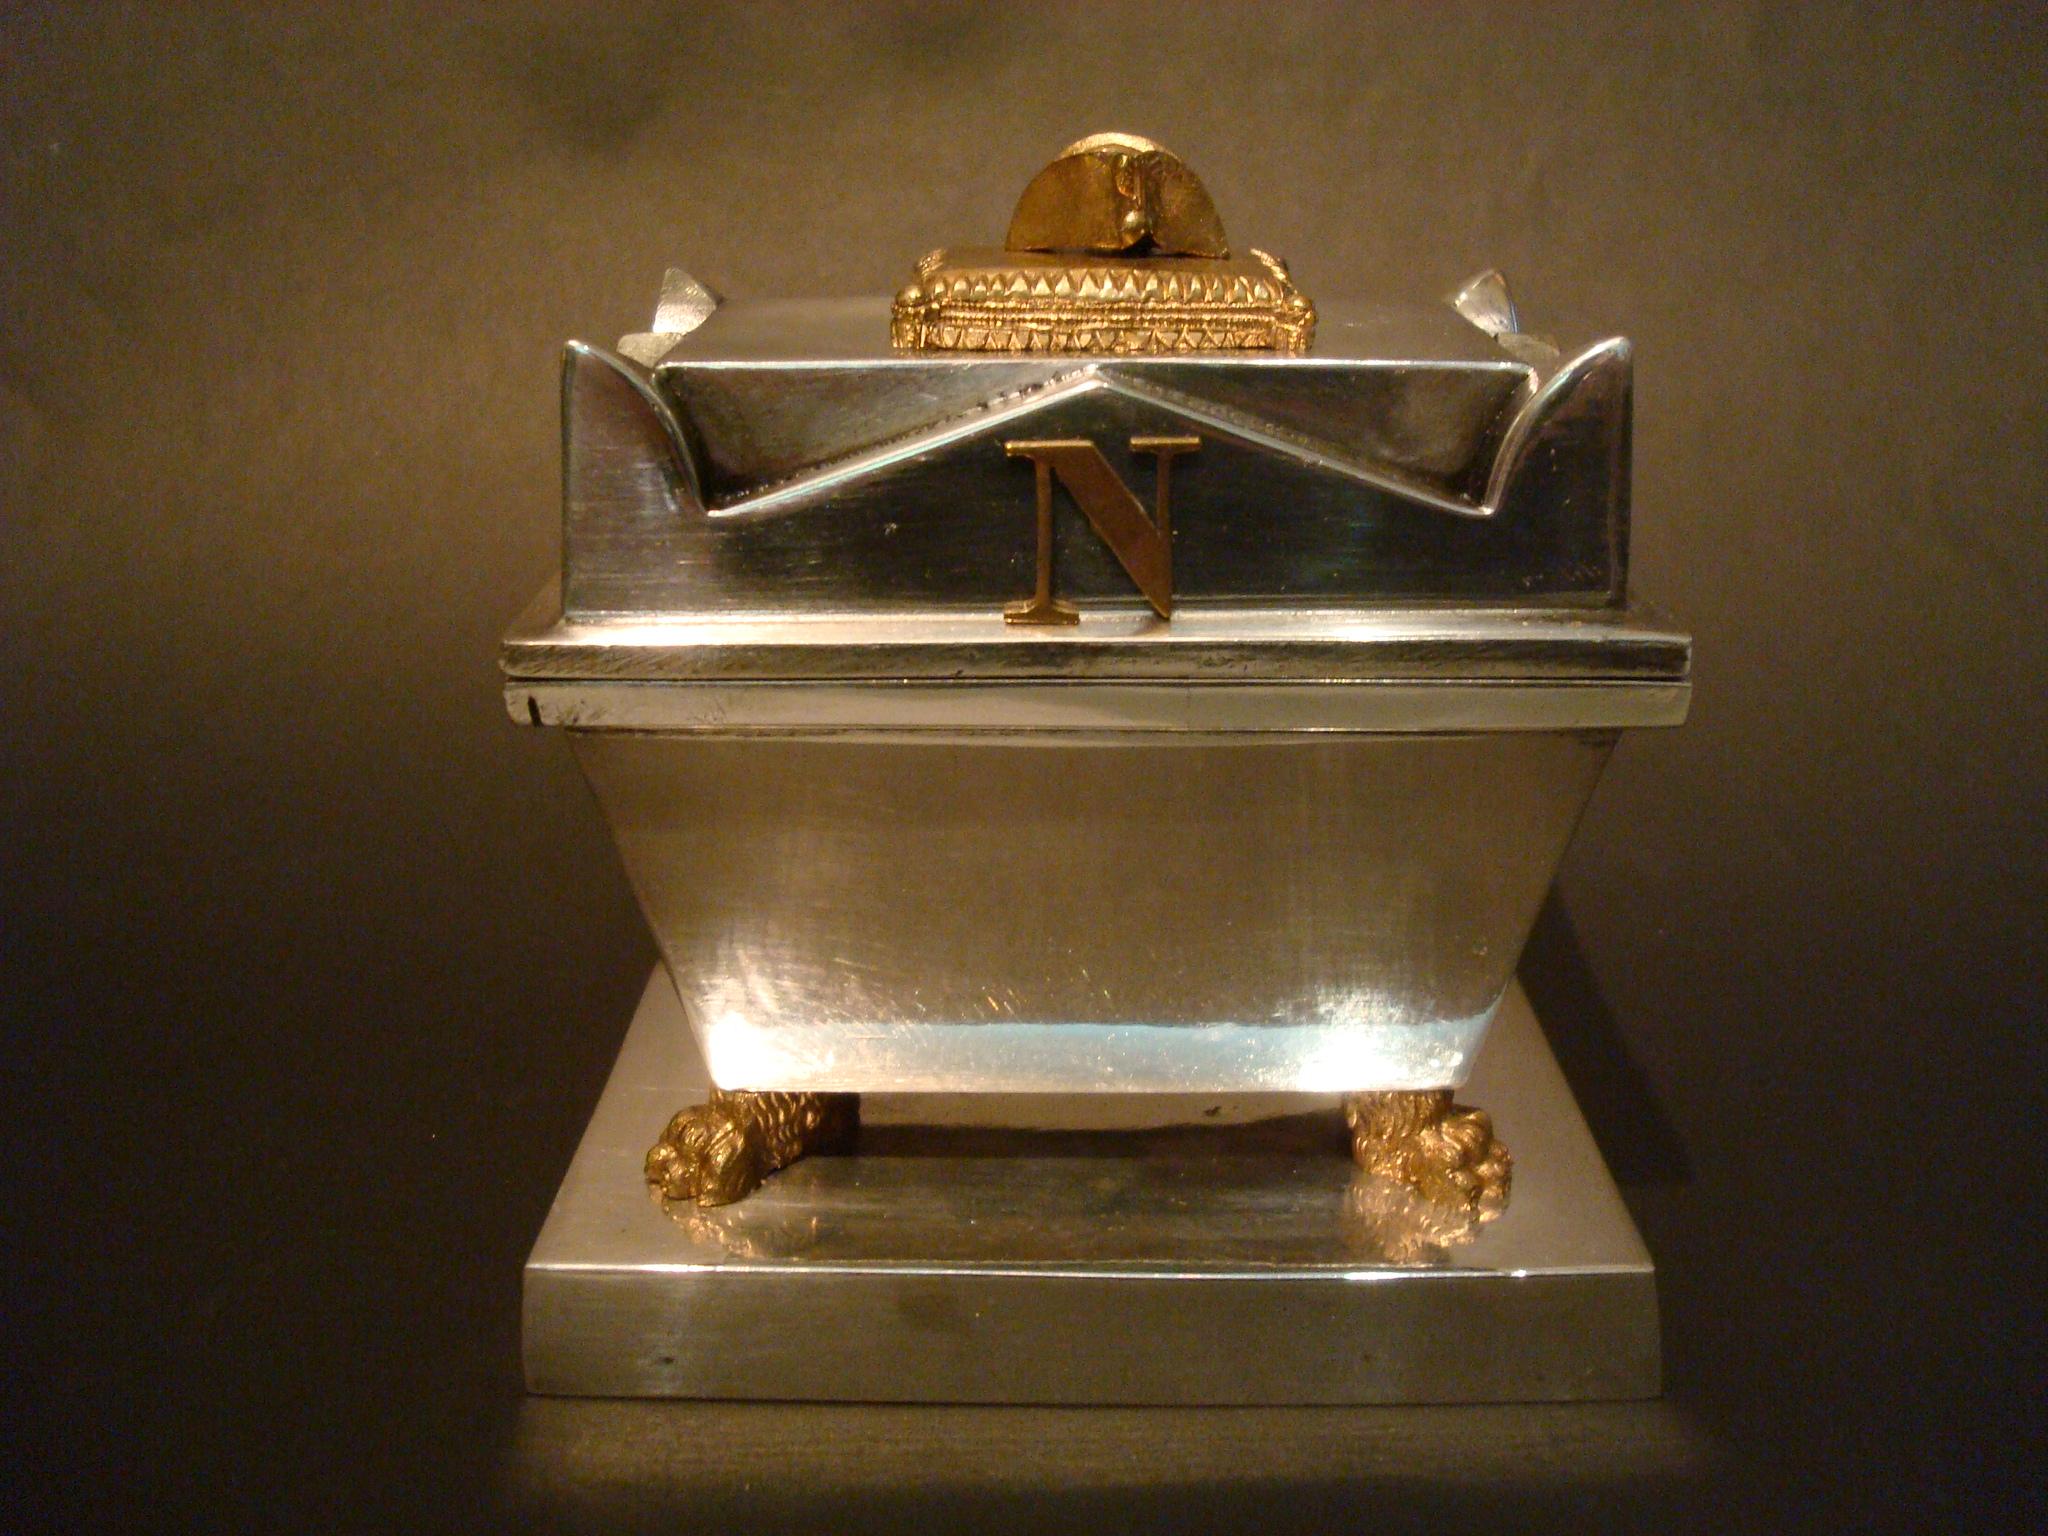 Napoleonic inkstand, silvered cast iron model of Napoleon's Tomb, fourth quarter of the 19th century, the silvered tomb with a gold plated bicorne hat on top, When you open the lid you find a inkwell desk set, and under it reveals in the interior a